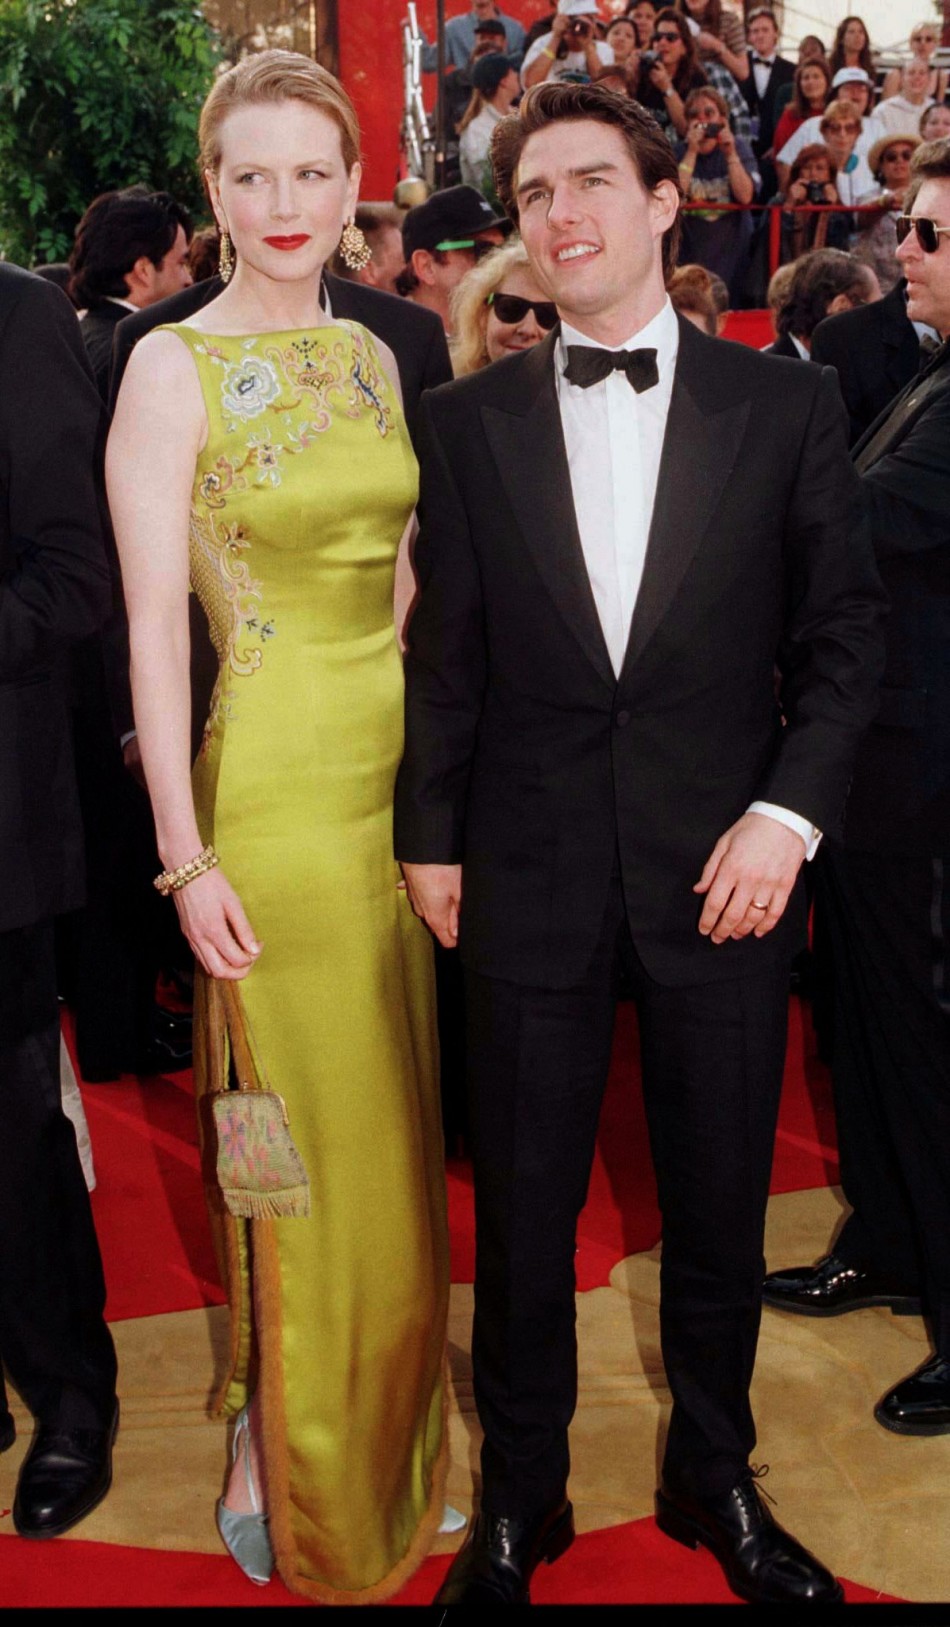 Academy Award nominee for Best Actor Tom Cruise arrives with his wife, actress Nicole Kidman, at the 69th annual Academy Awards March 24. Cruise was nominated for his role in Jerry Maguire. Kidman is wearing a Christian Dior dress.